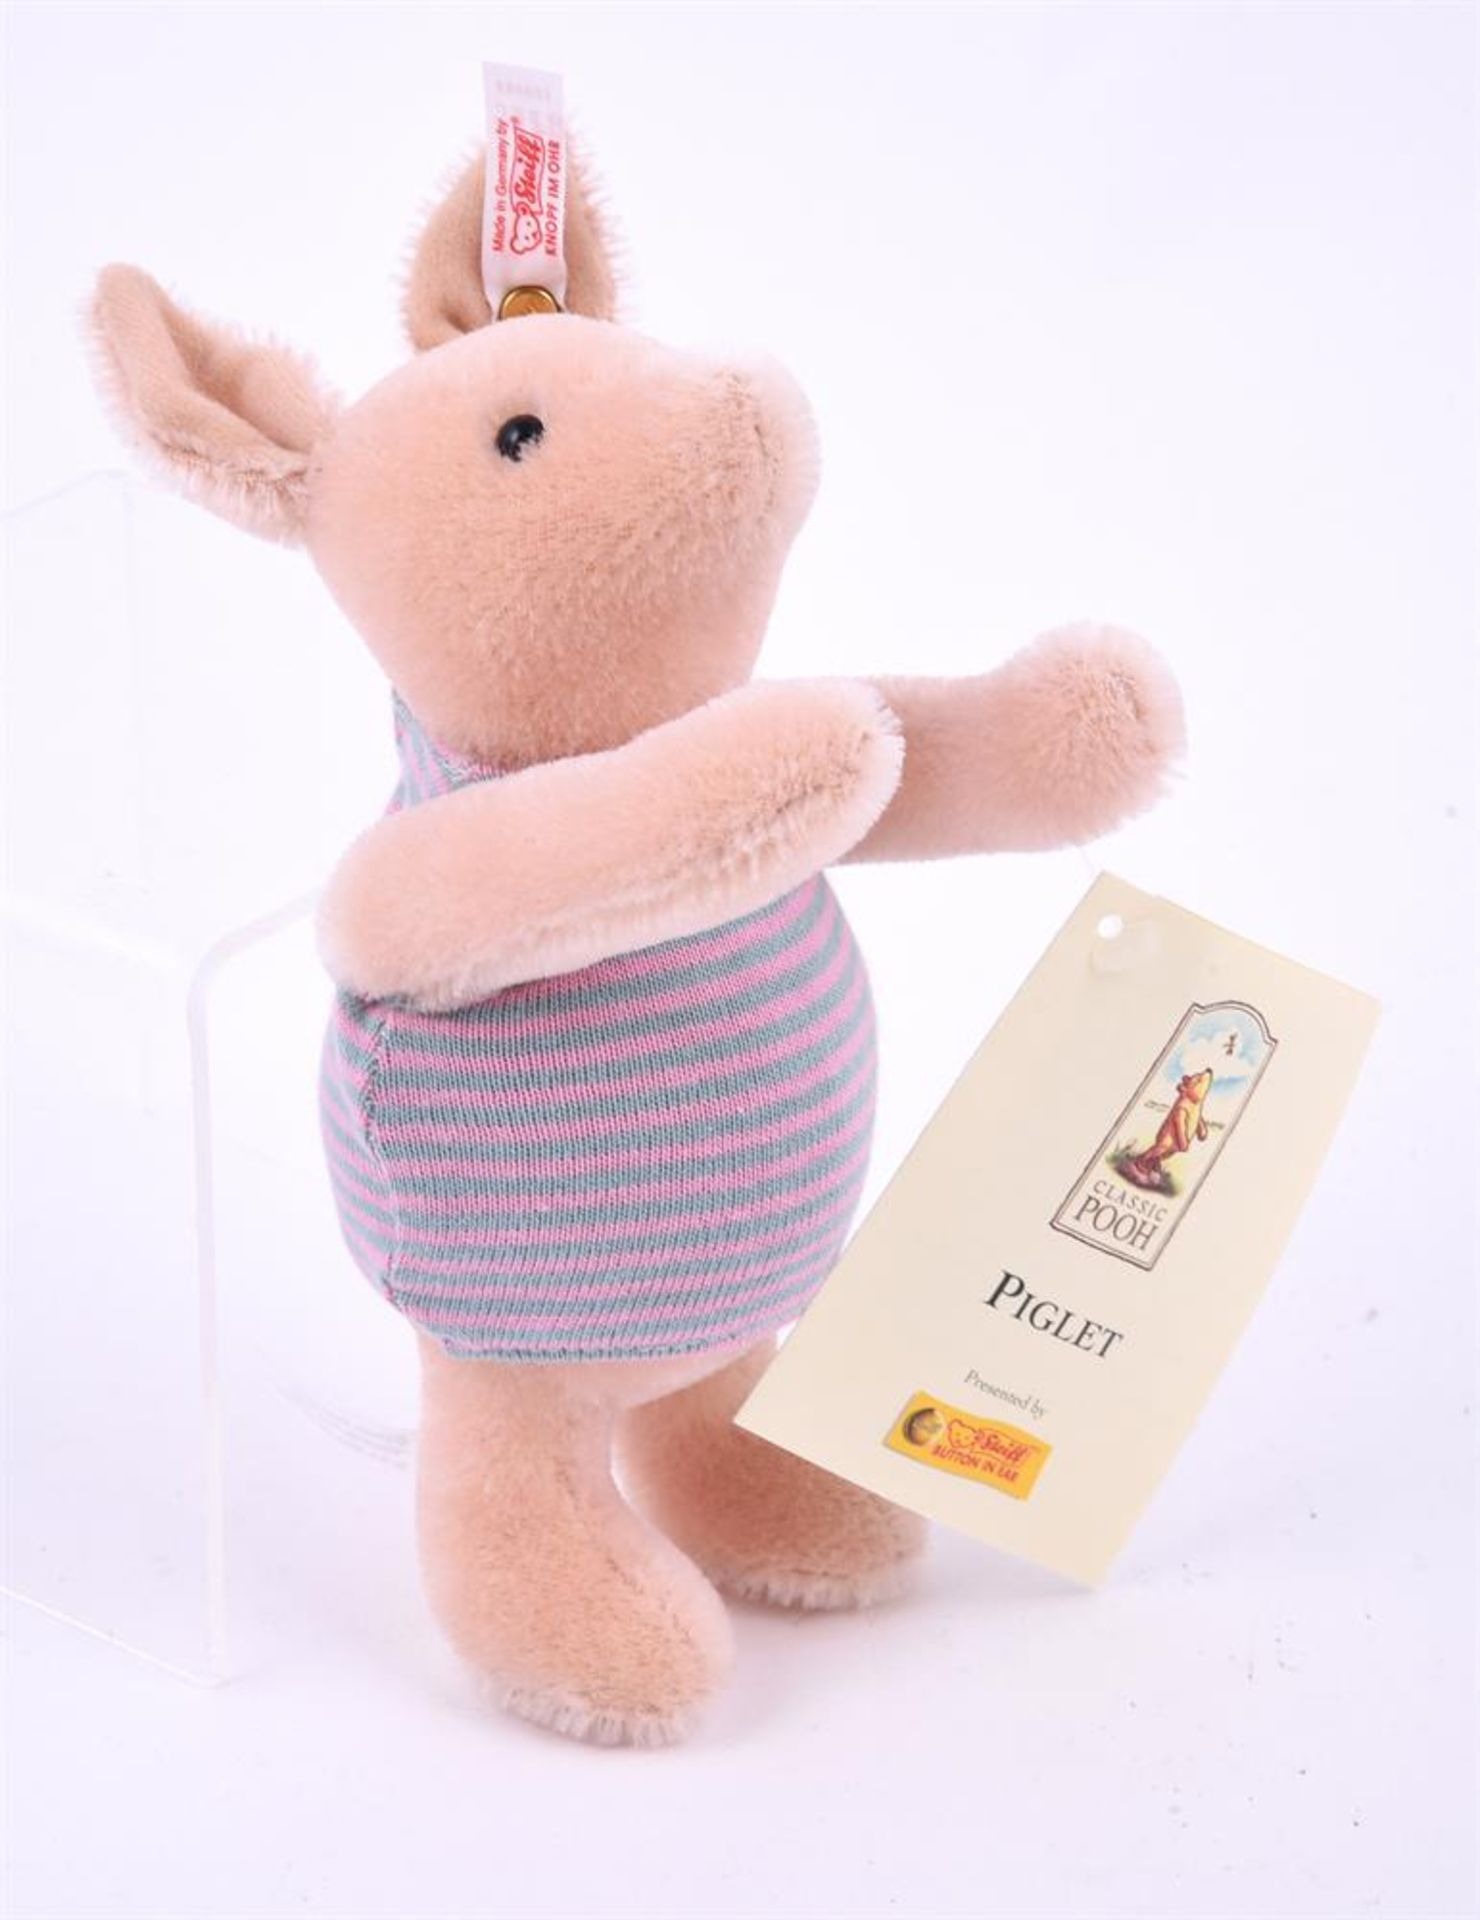 STEIFF, PIGLET, 03177, CLASSIC POOH COLLECTION, CIRCA 2002 - Image 2 of 3